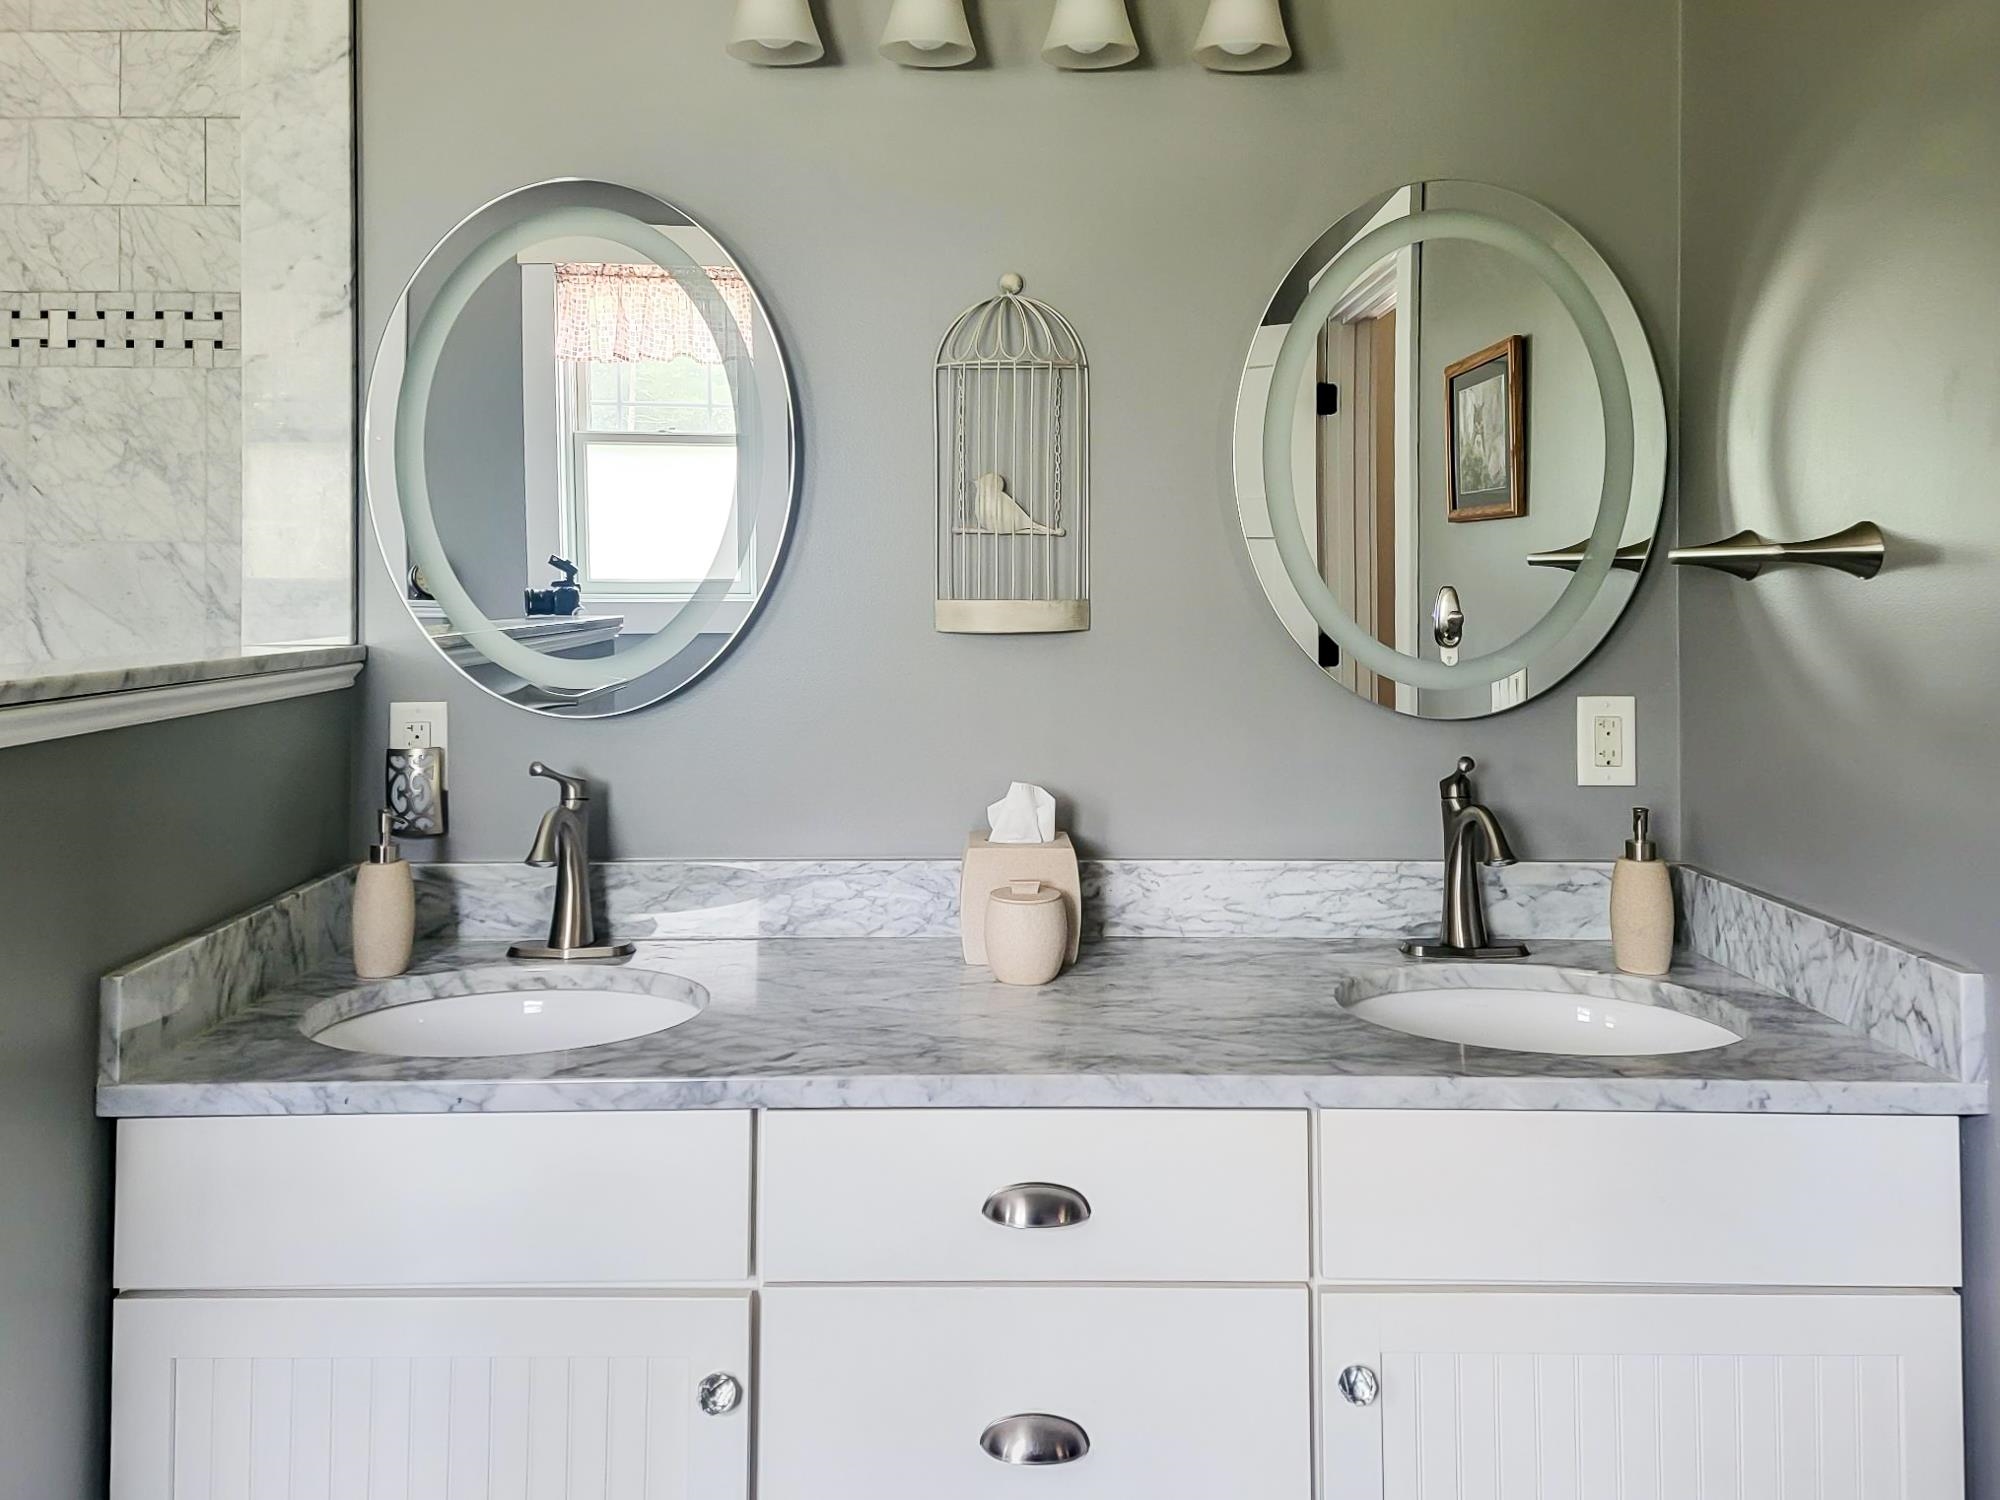 Lighted mirrors above double vanity